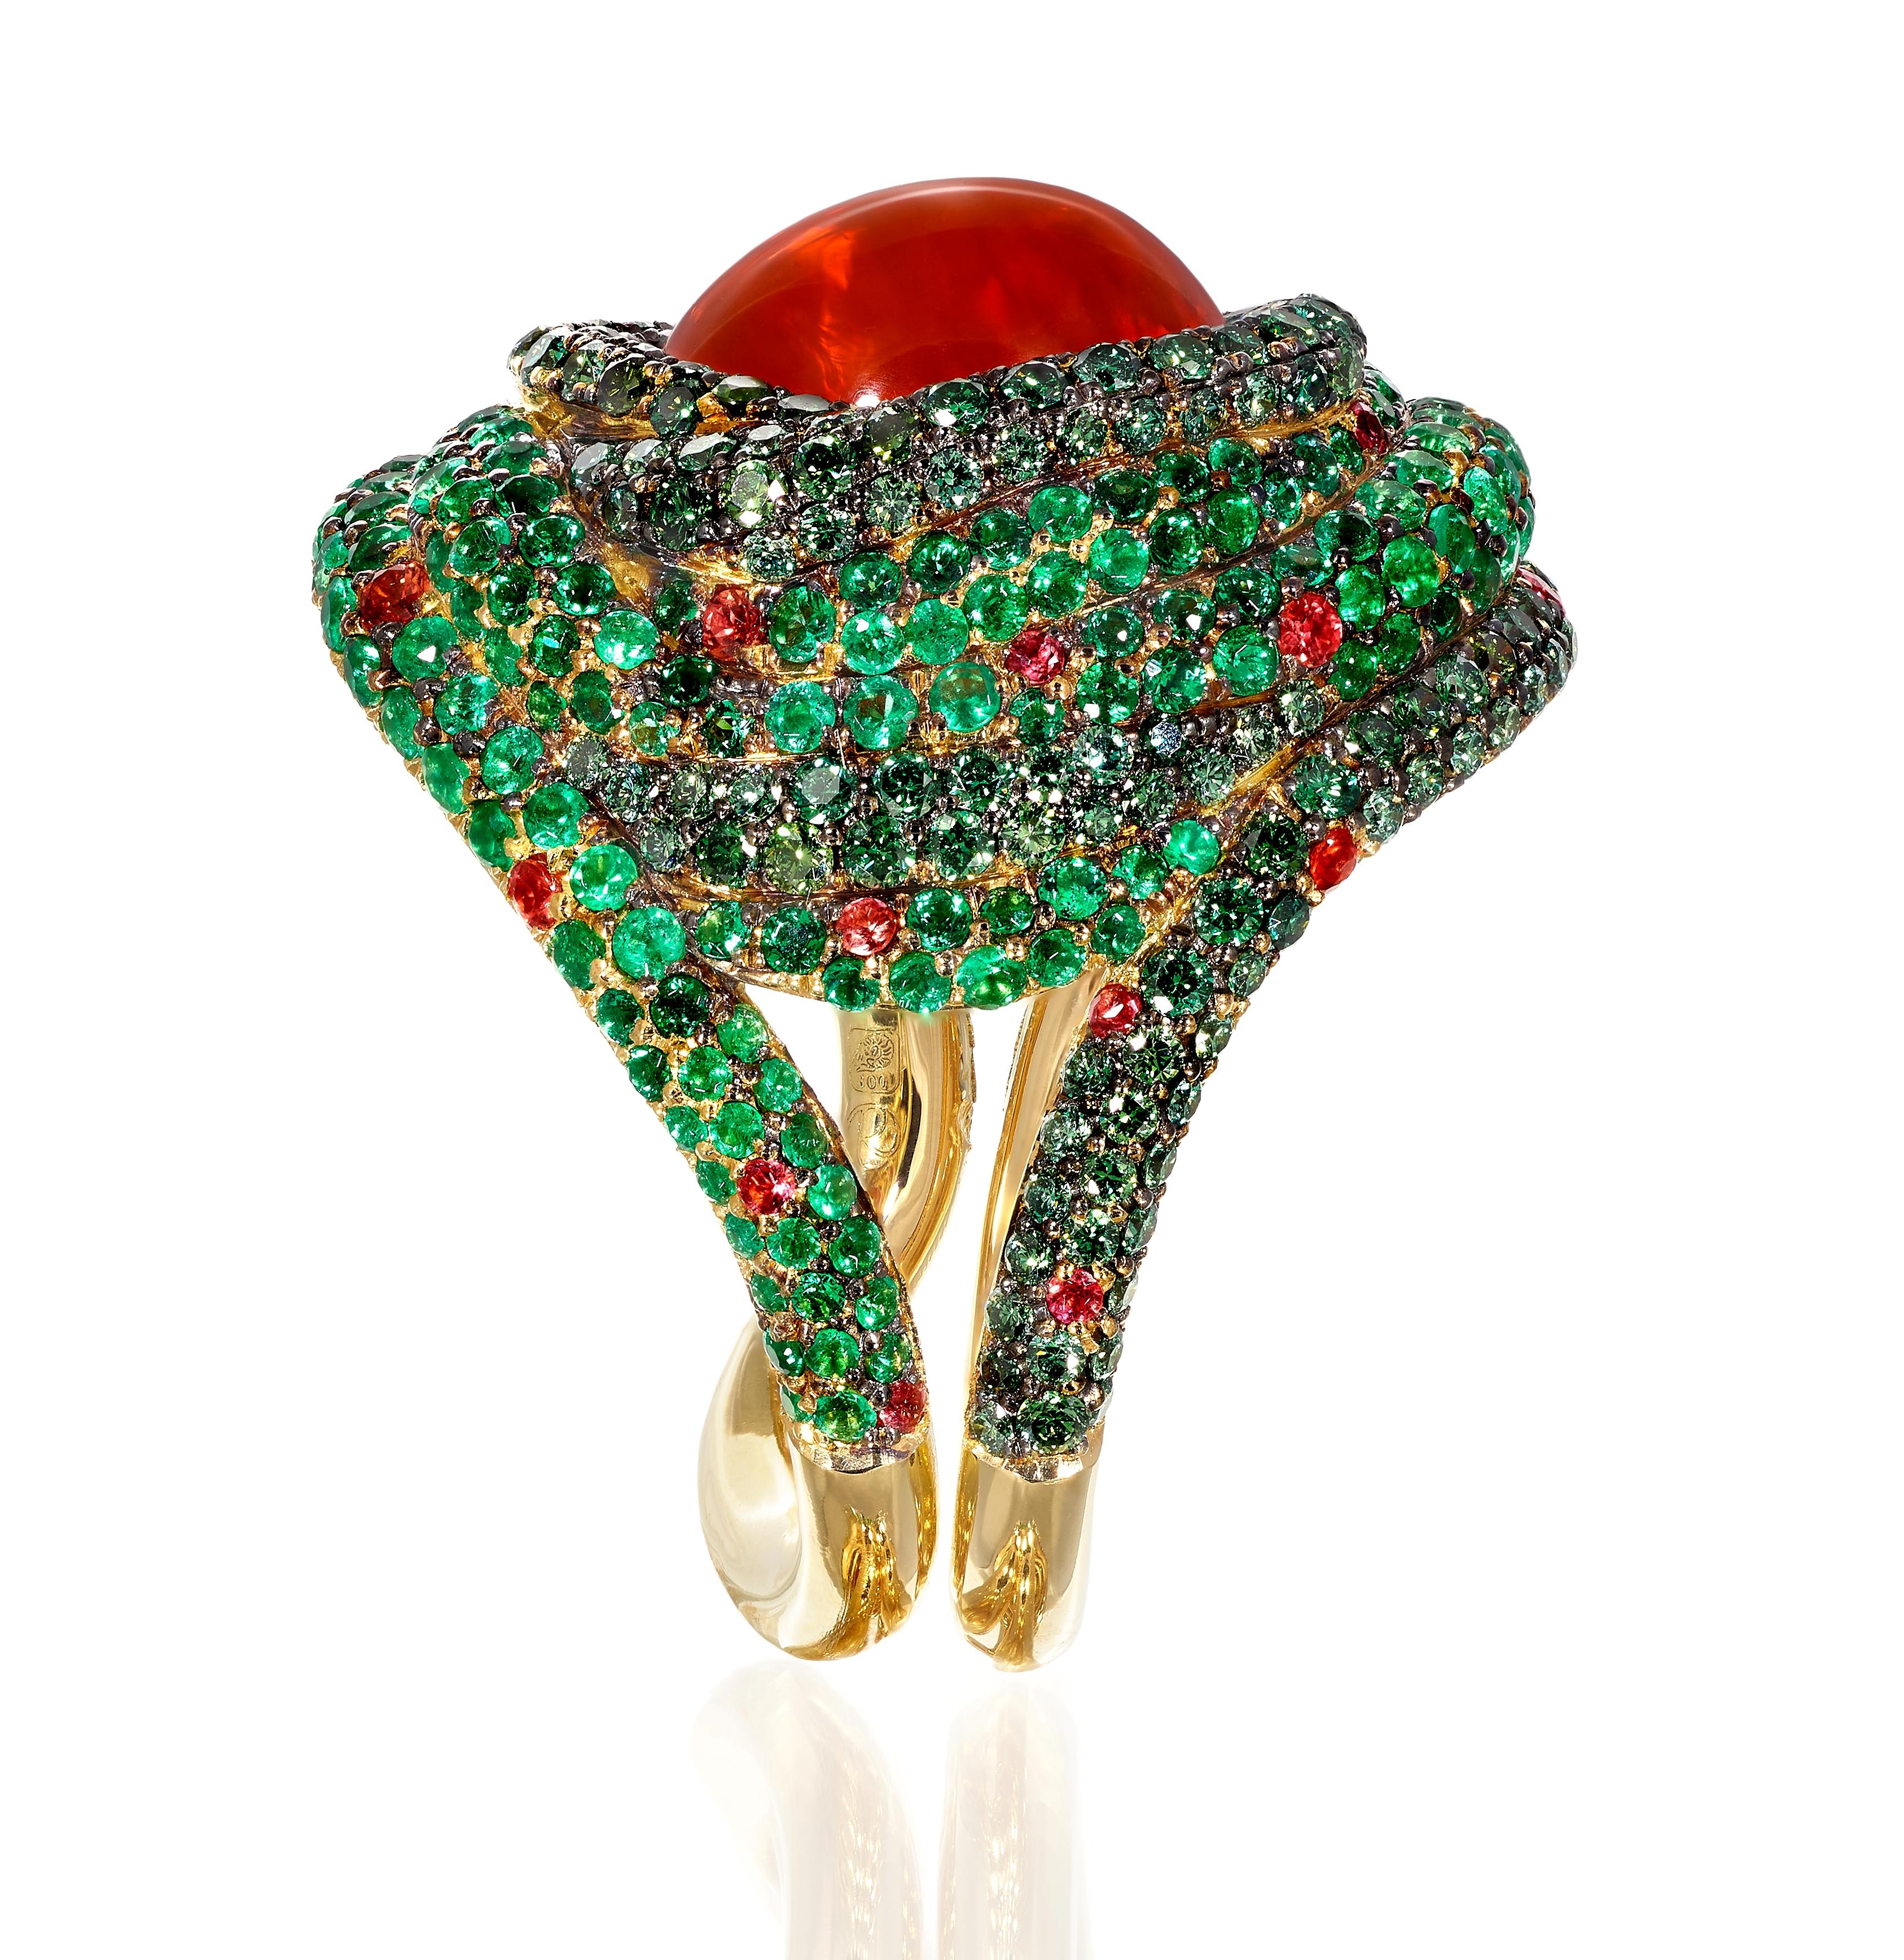 Rosior Contemporary Cocktail Ring set in Yellow Gold with:
- 1 Cabochon Cut Fire Opal with 4,93 ct, certified by AIGS (ref. GF21051067);
- 226 Emeralds with 1,59 ct;
- 205 Green Diamonds with 1,22 ct;
- 12 Orange Sapphires with 0,21 ct.
This unique